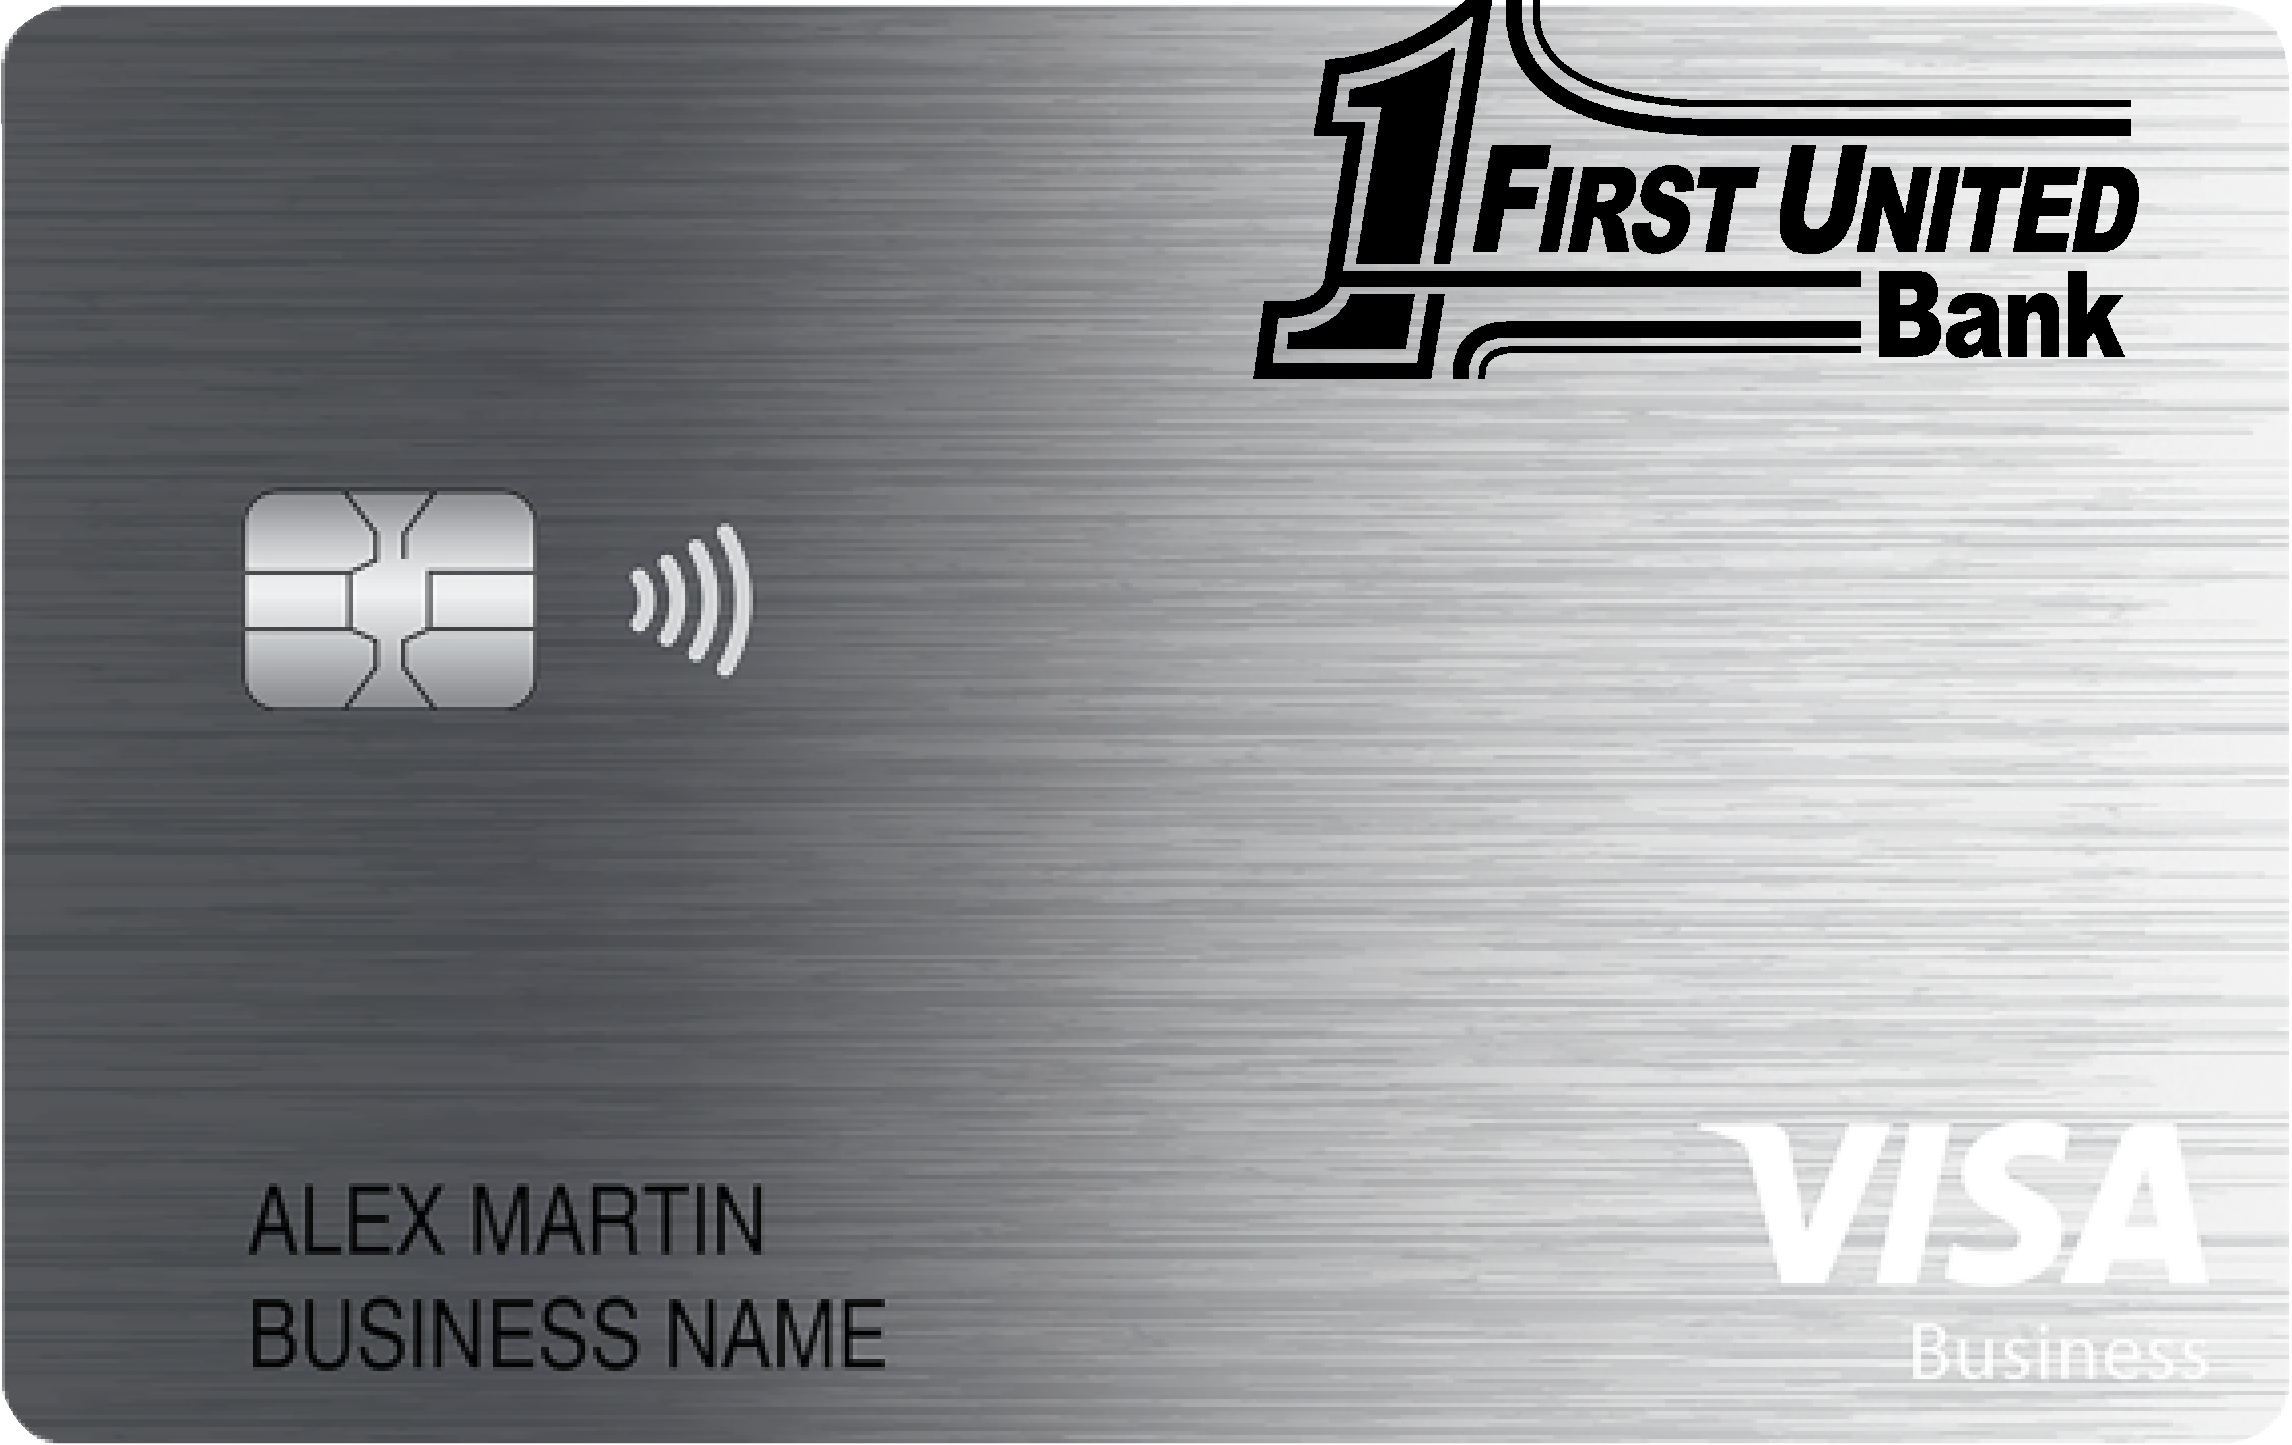 First United Bank Business Cash Preferred Card